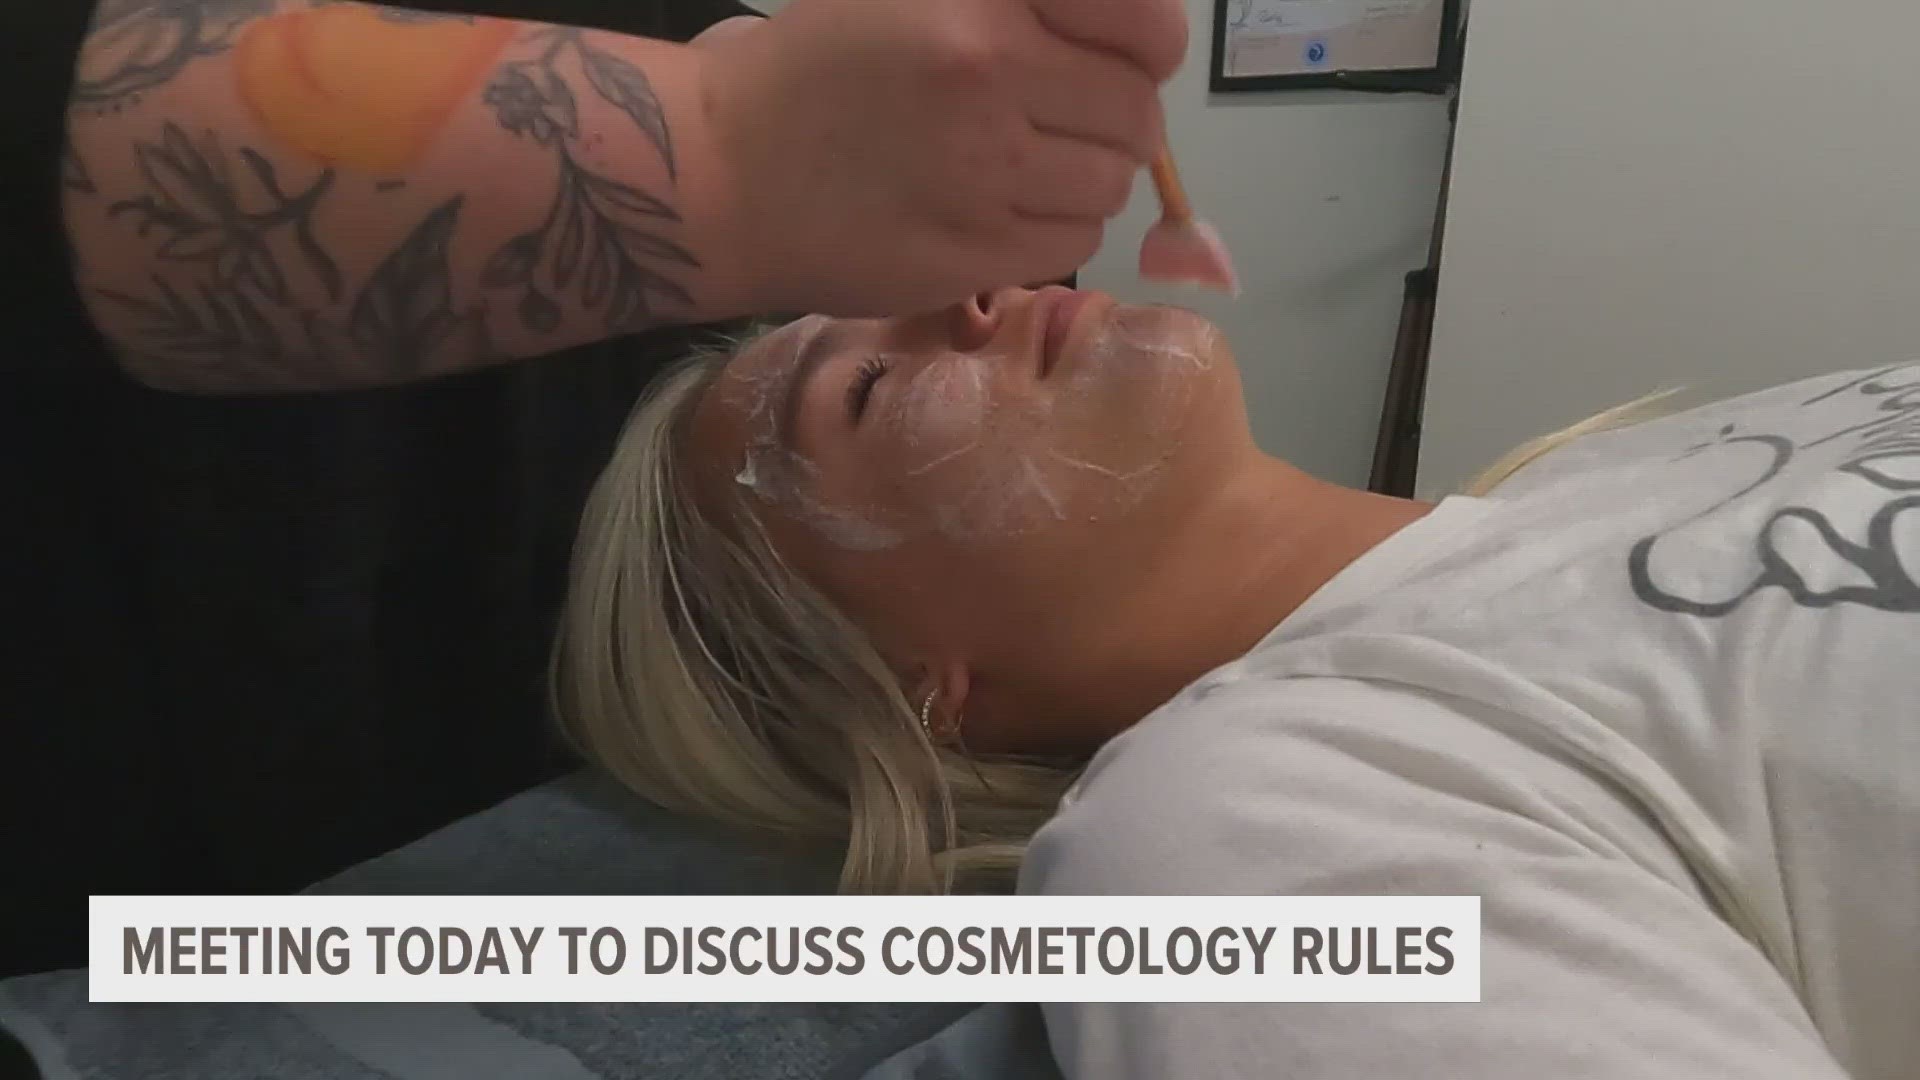 The changes have proven to be controversial after more than 100 estheticians and their customers spoke out against the proposal earlier this month.